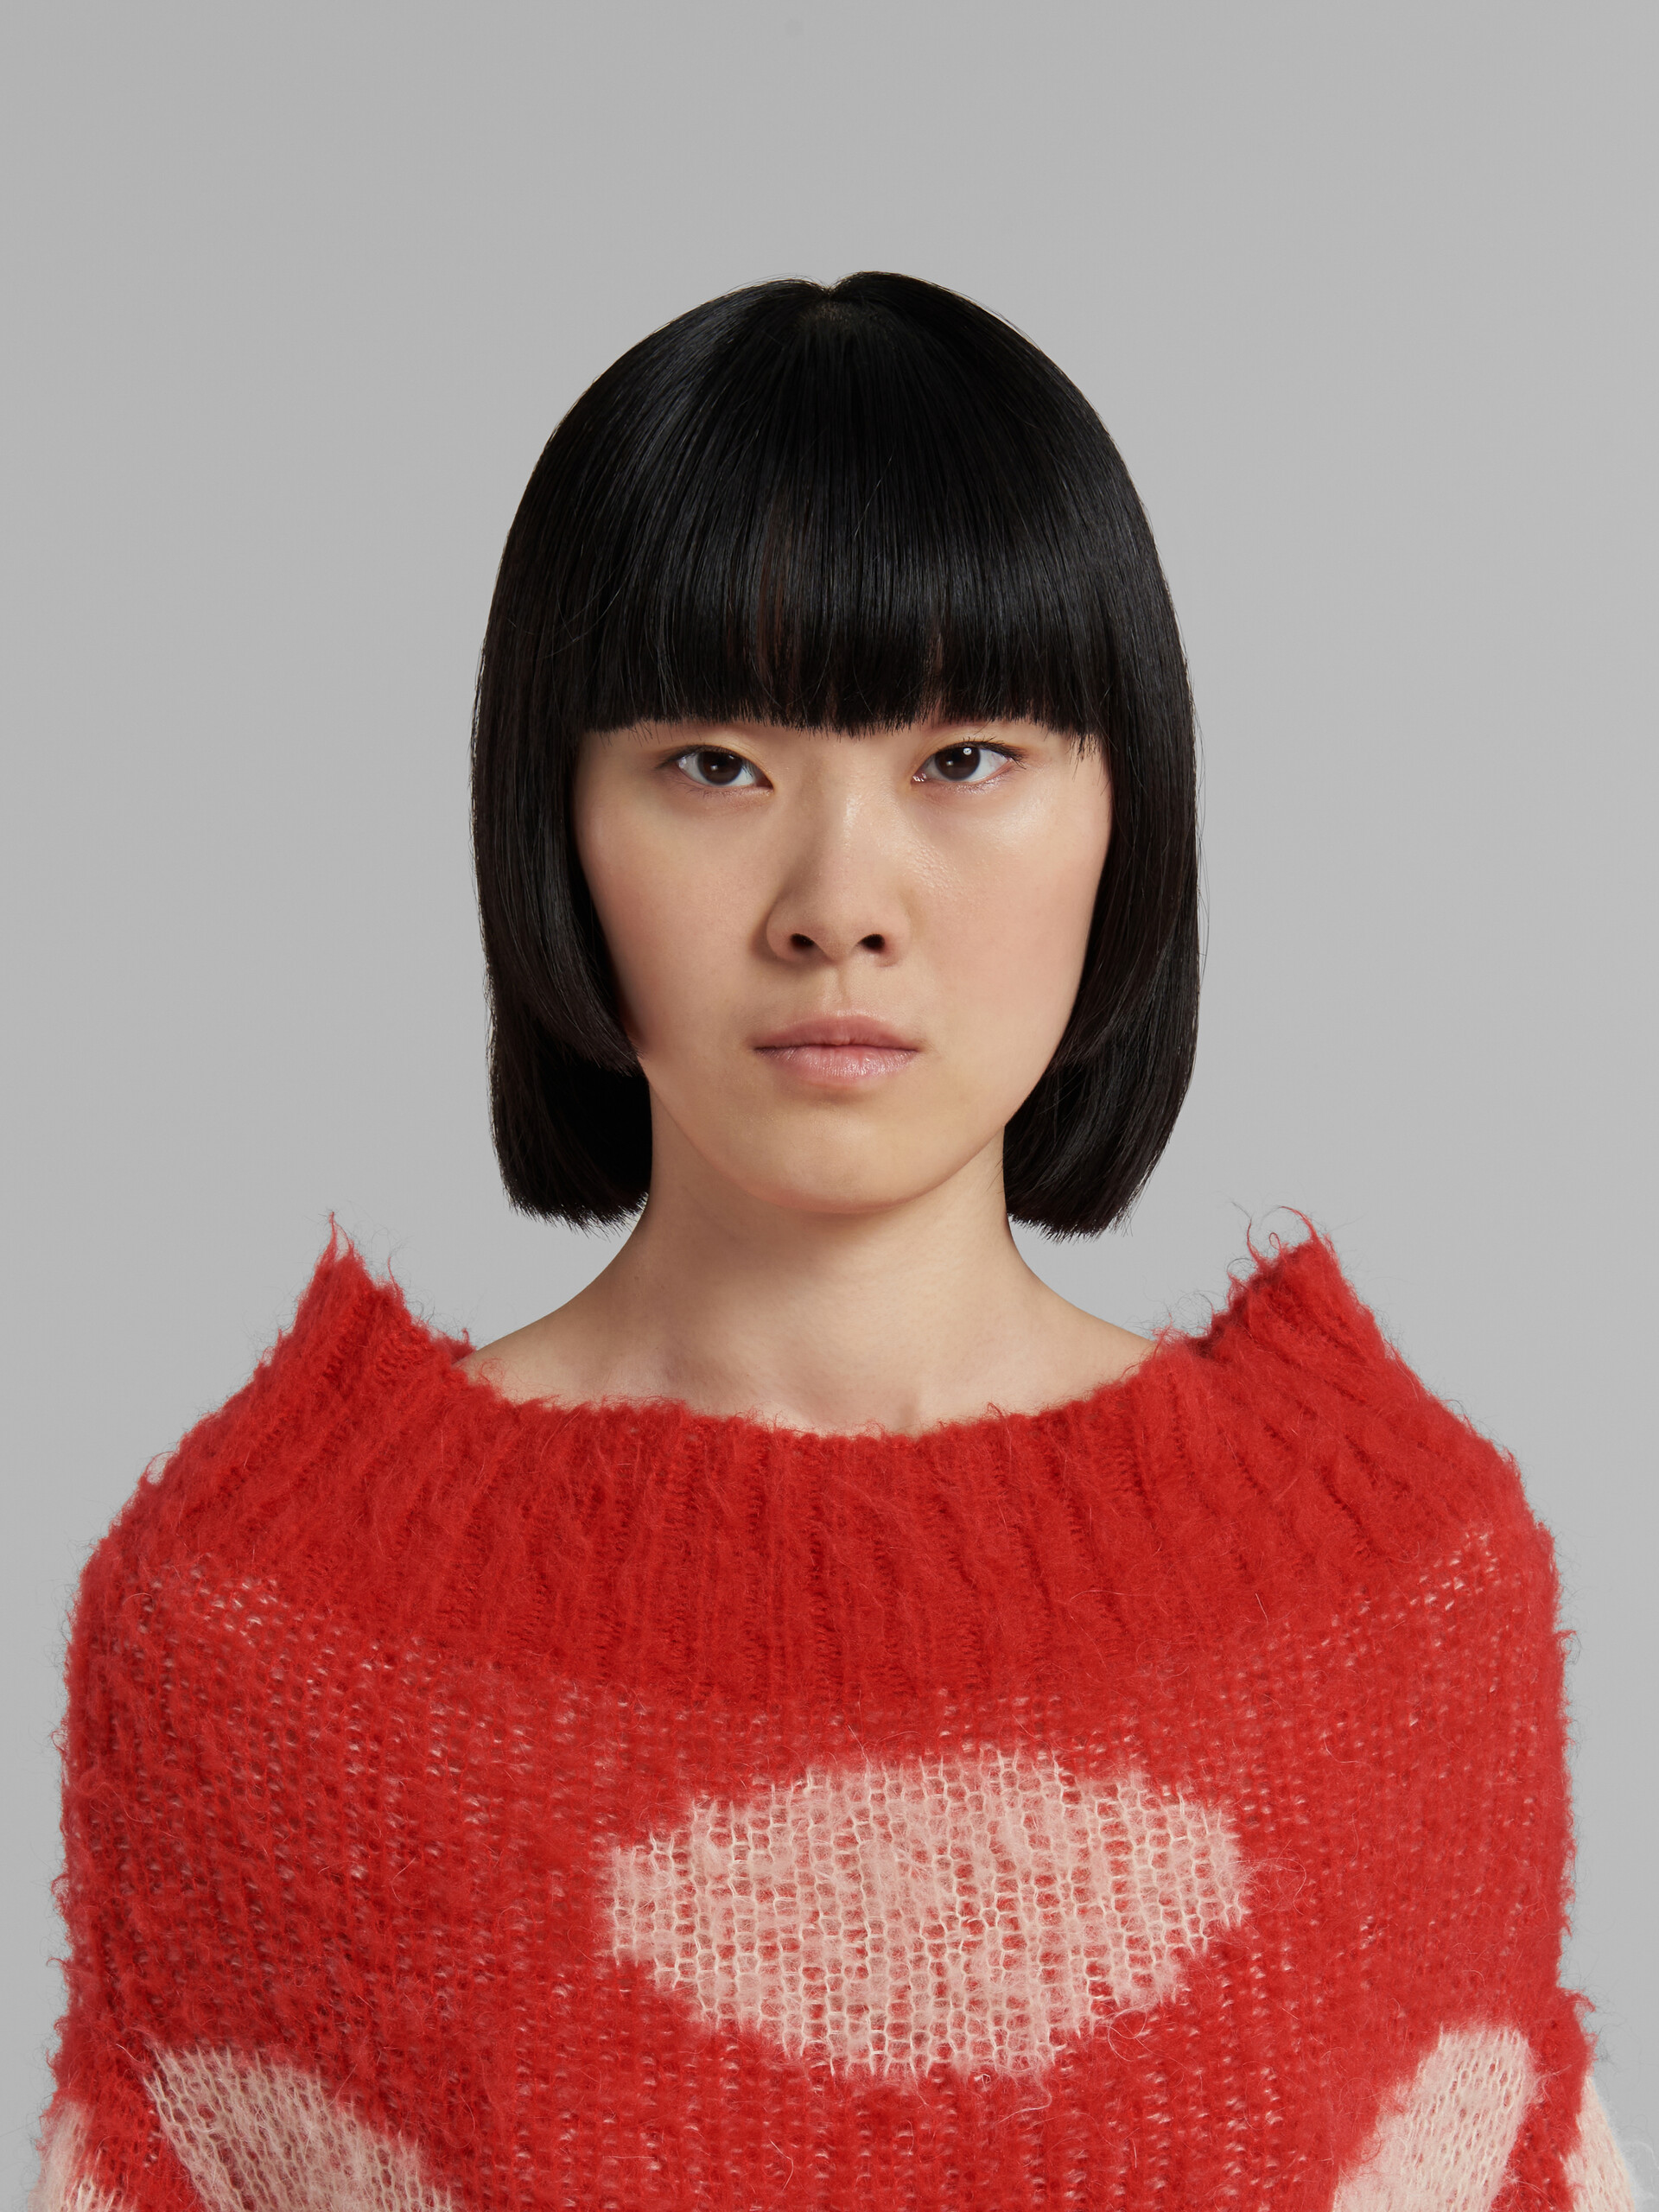 Red mohair boat-neck jumper with polka dots - Pullovers - Image 4